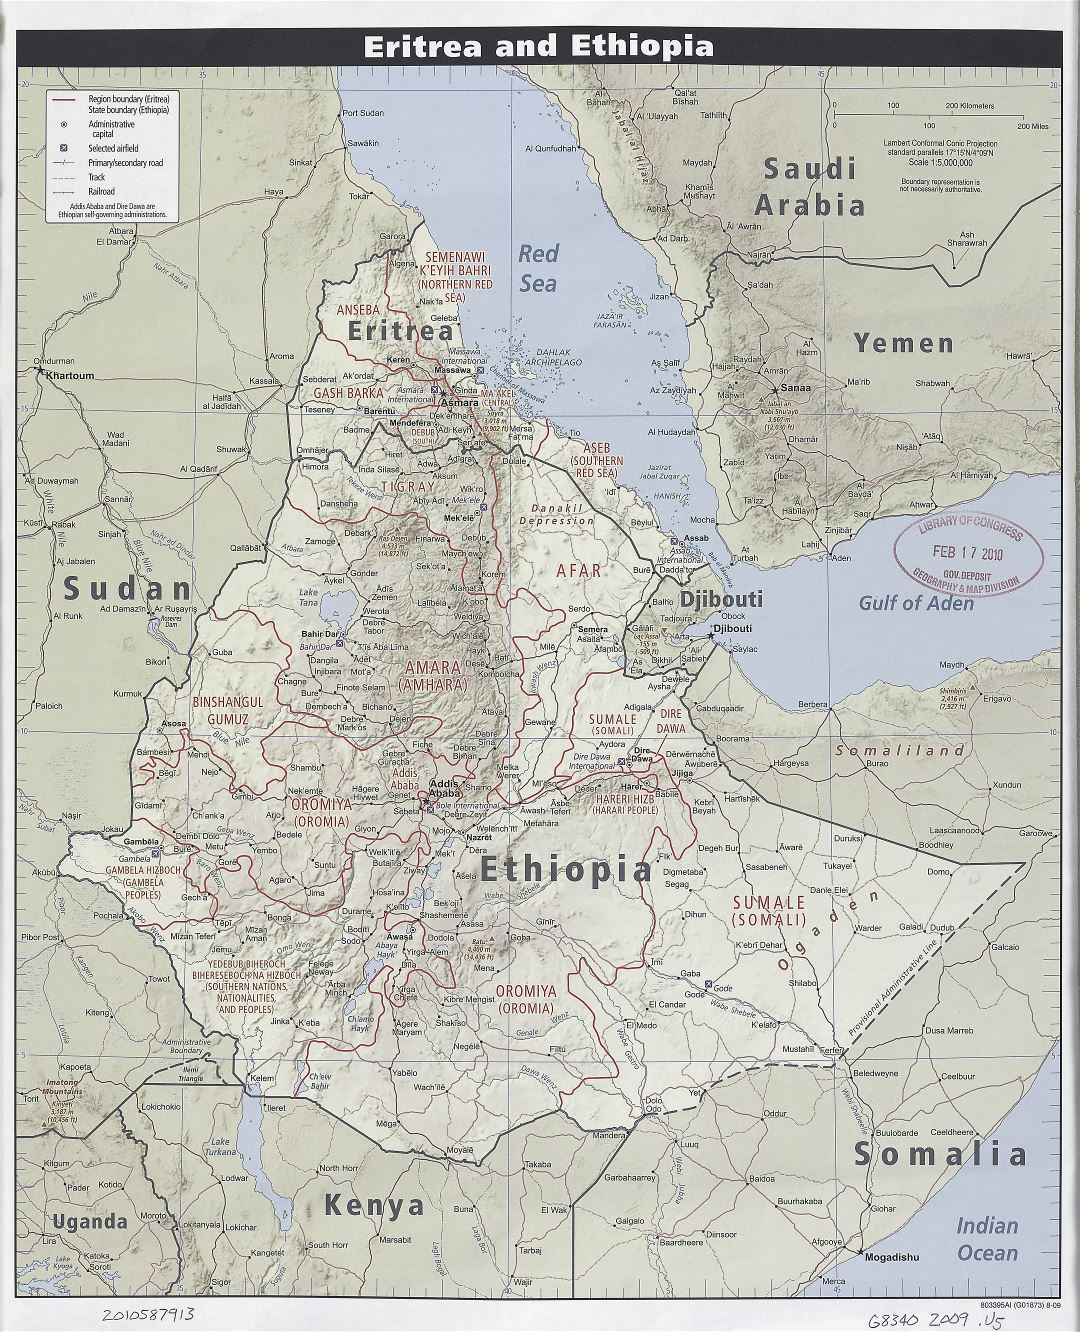 Large scale political and administrative map of Eritrea and Ethiopia with relief, roads, railroads, airports and cities - 2009